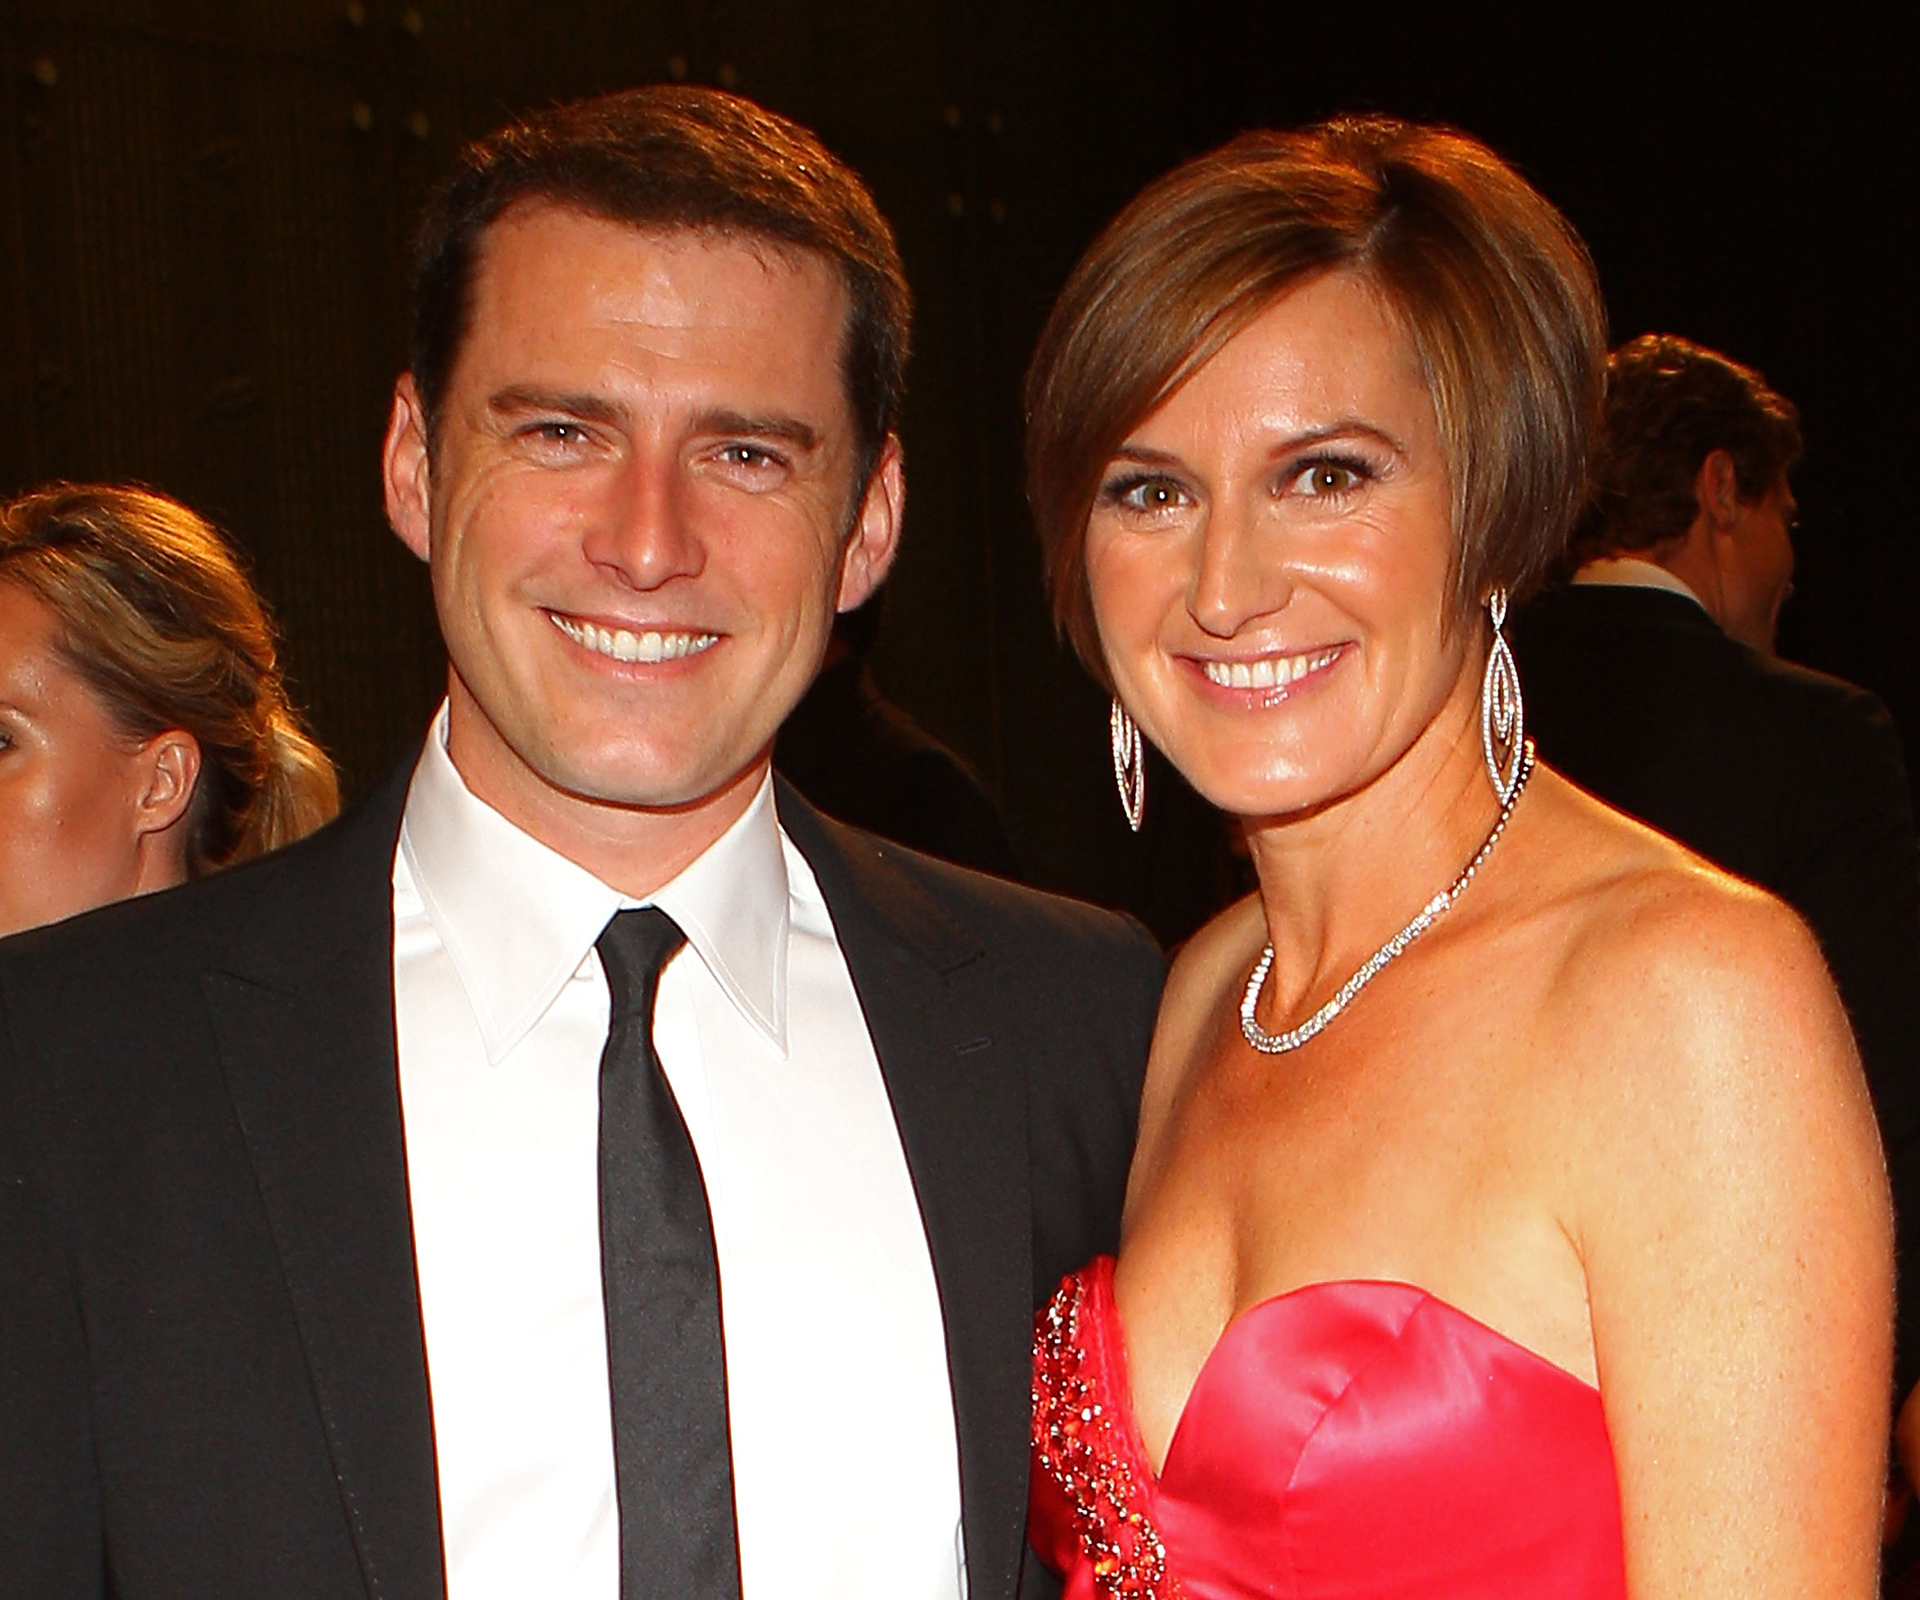 Karl Stefanovic’s wife Cassandra Thorburn hits back, claims she’s not an “unhappy” stay-at-home mum